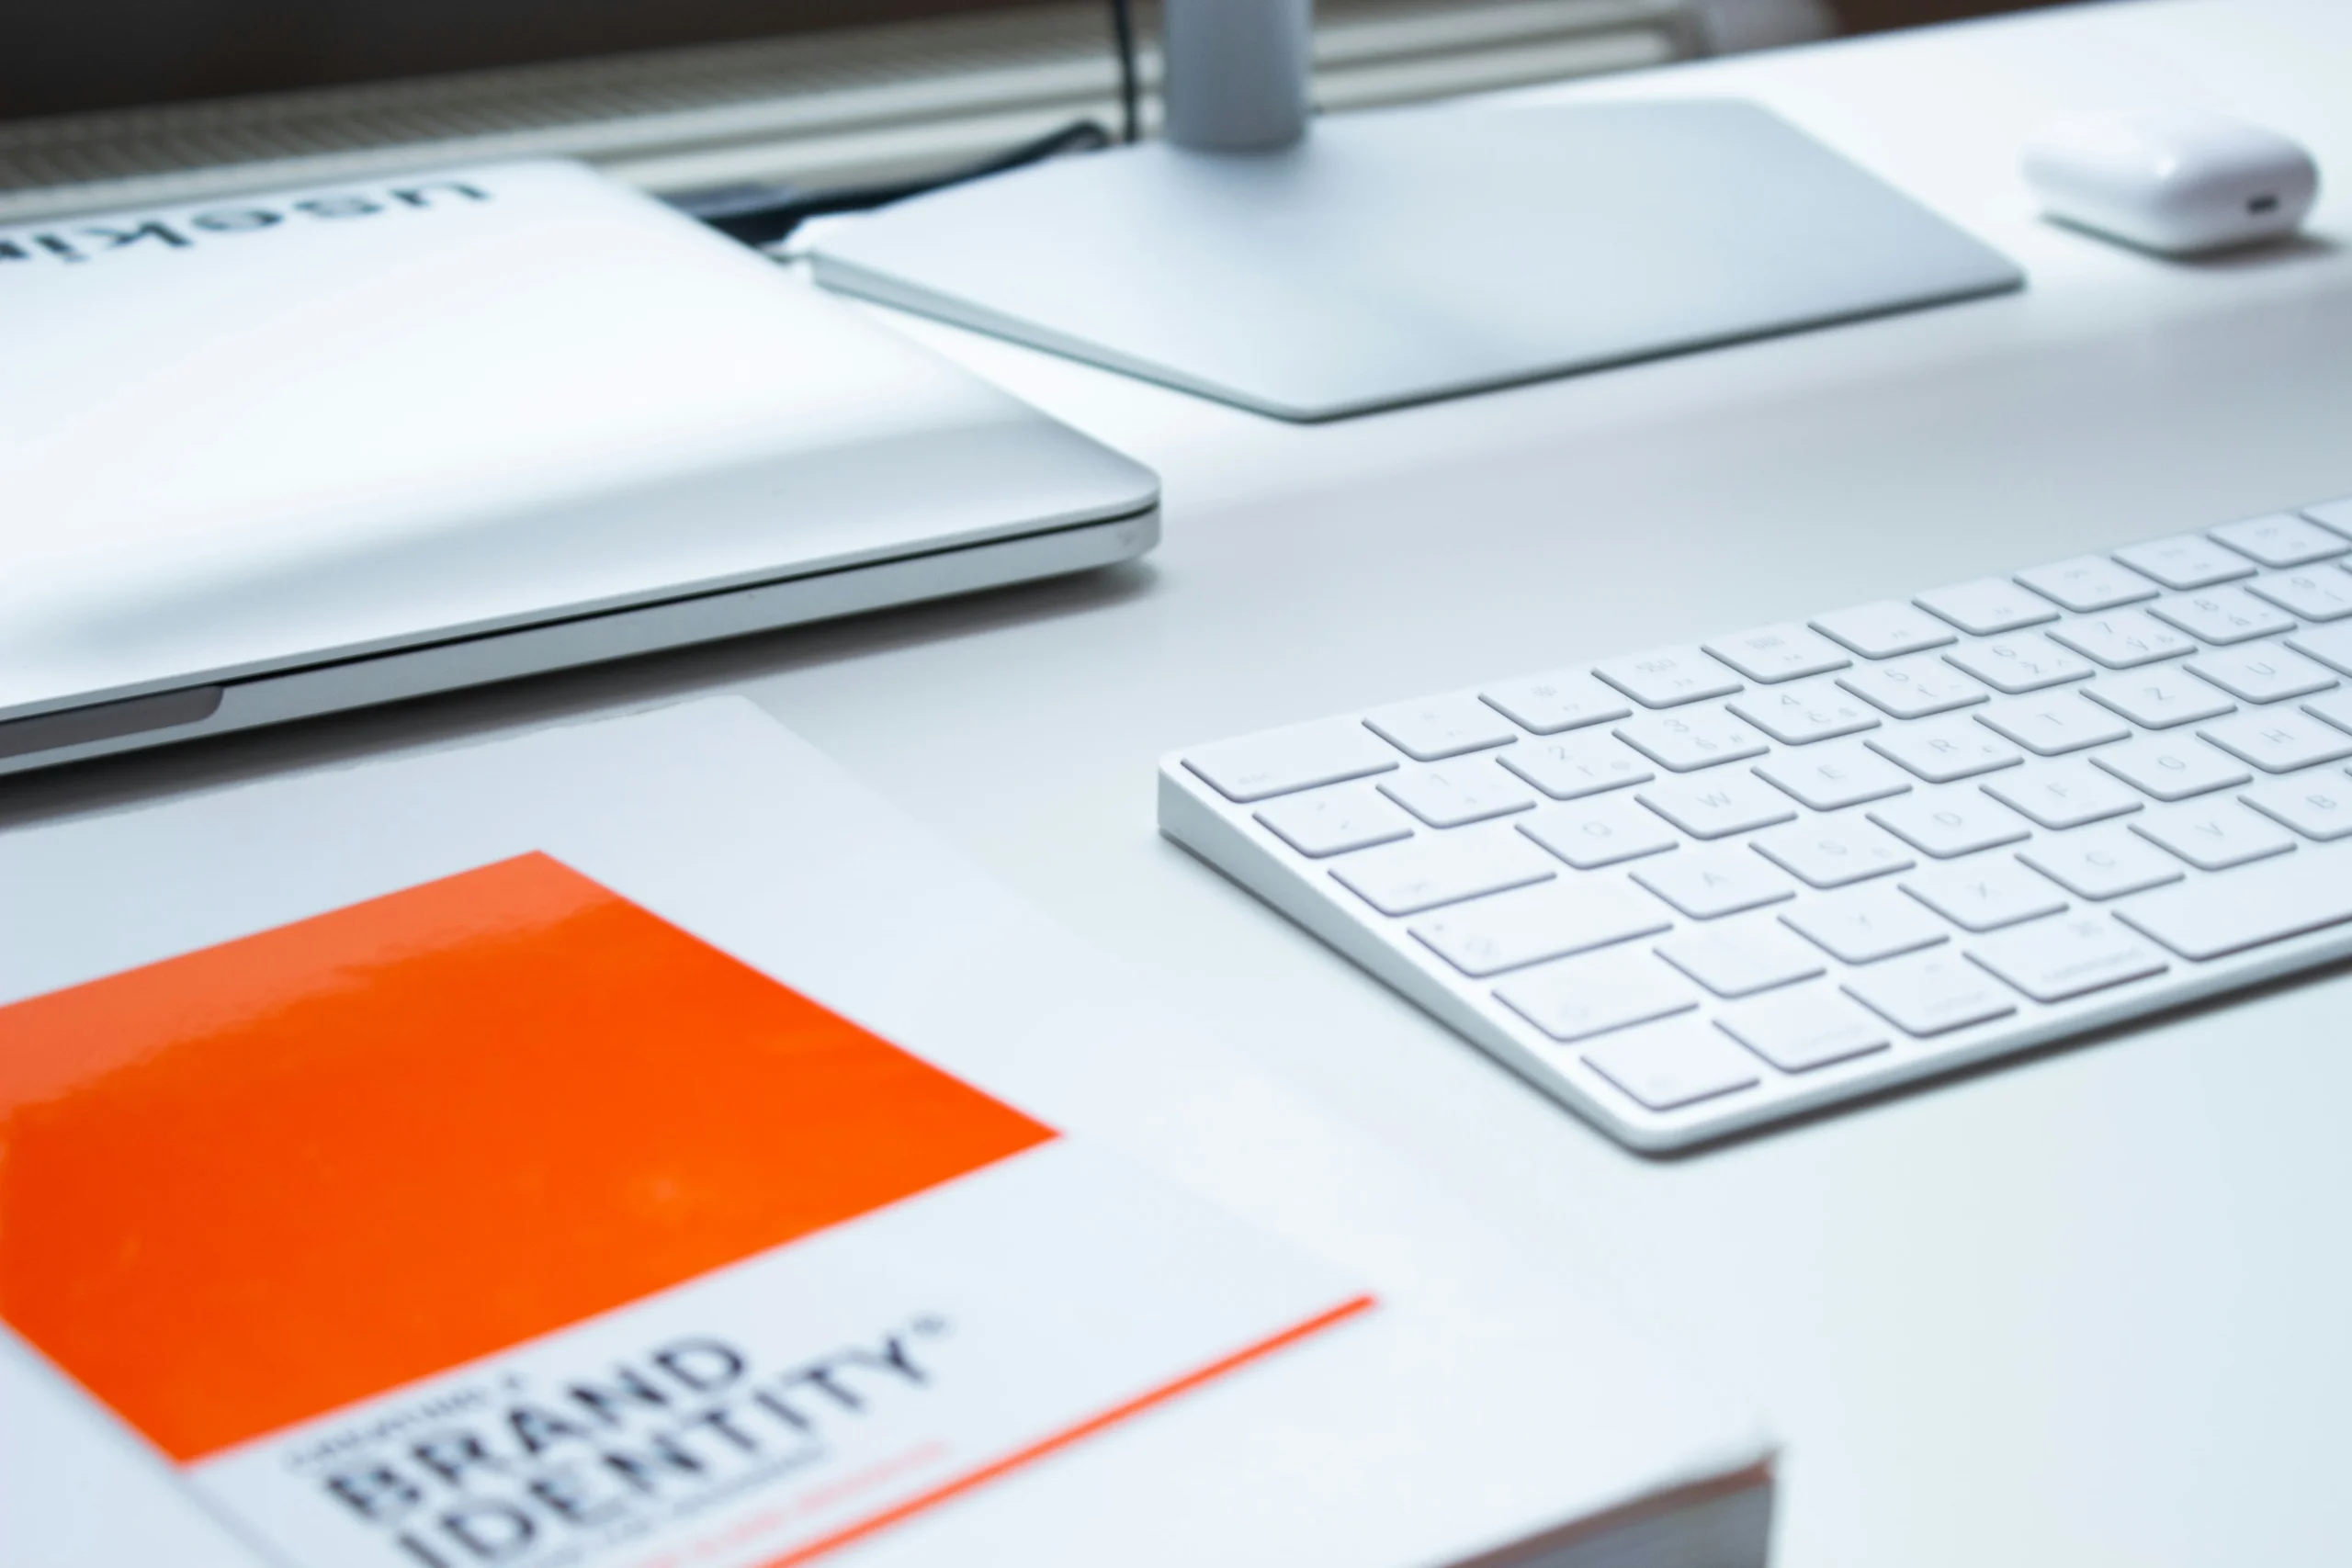 A picture of a white keyboard on a desk showing an orange book about best practices for the brand.